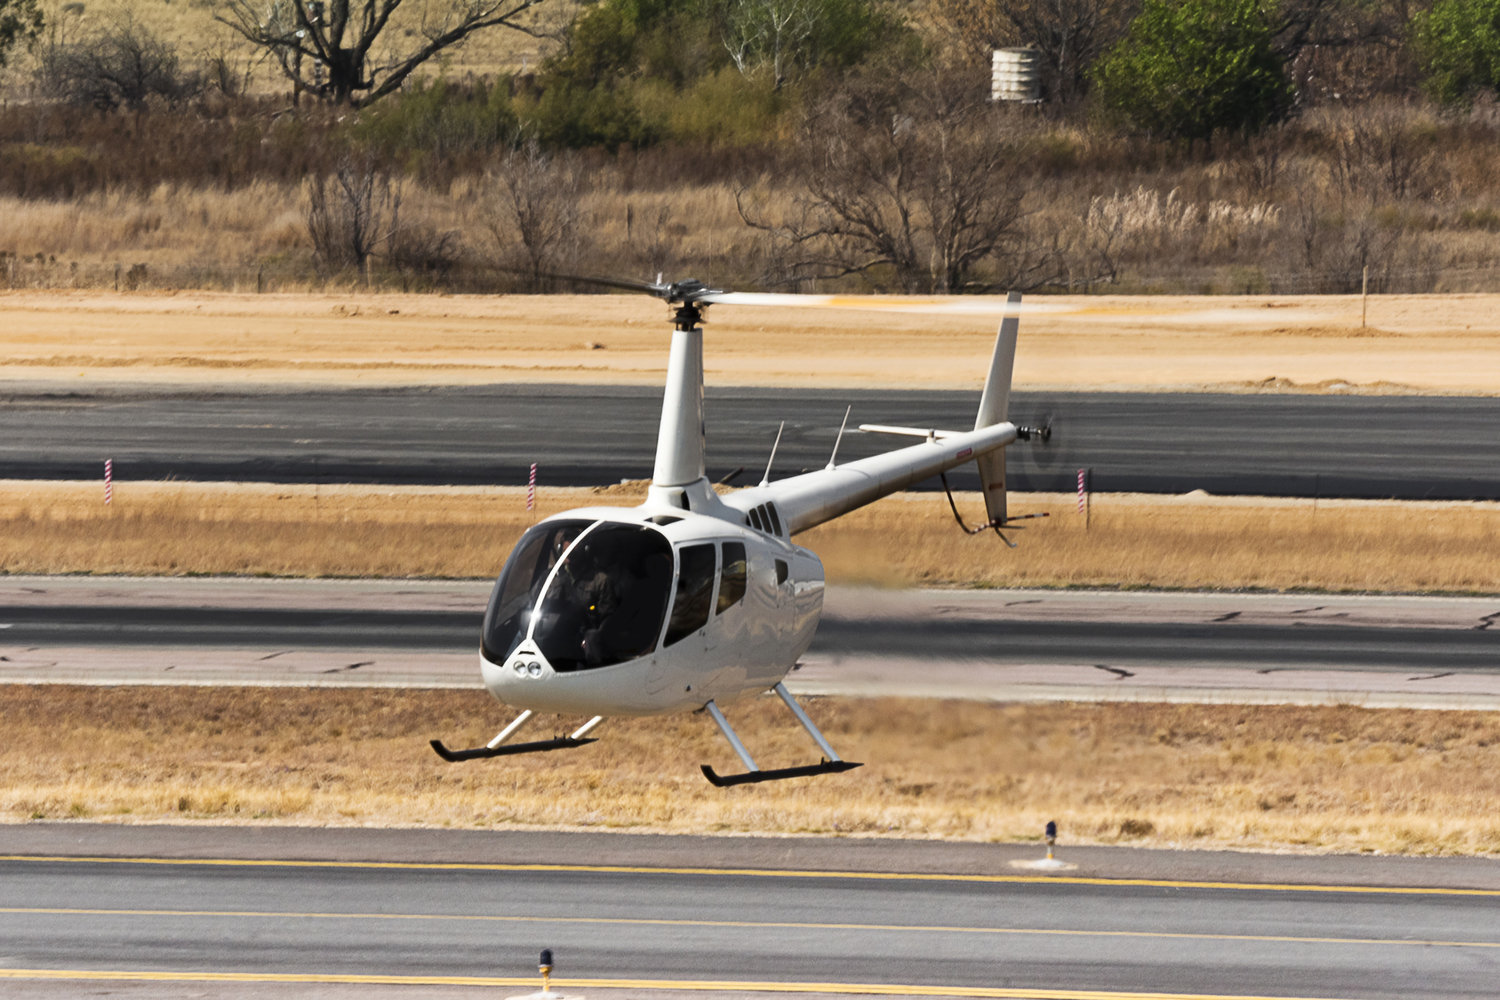 View of a Robinson R66, the same type of helicopter that went down in a remote area of Colusa County, California, on Sunday, according to the FAA. (Patrick Allen/Dreamstime/TNS)